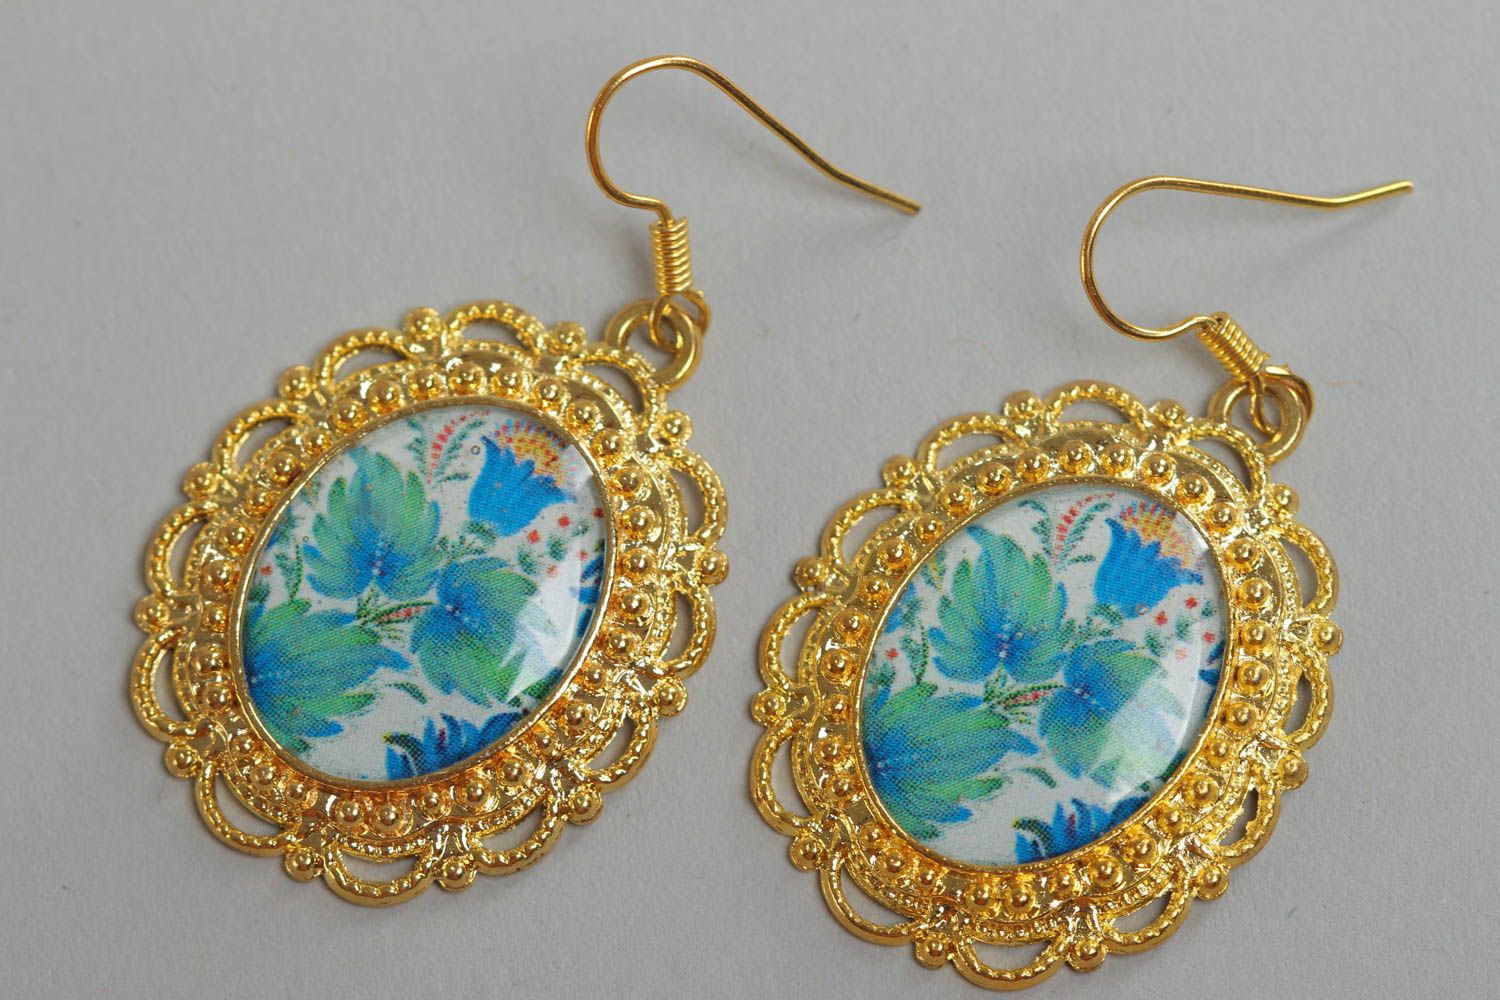 Handmade oval floral earrings with golden colored metal basis and glass glaze photo 2